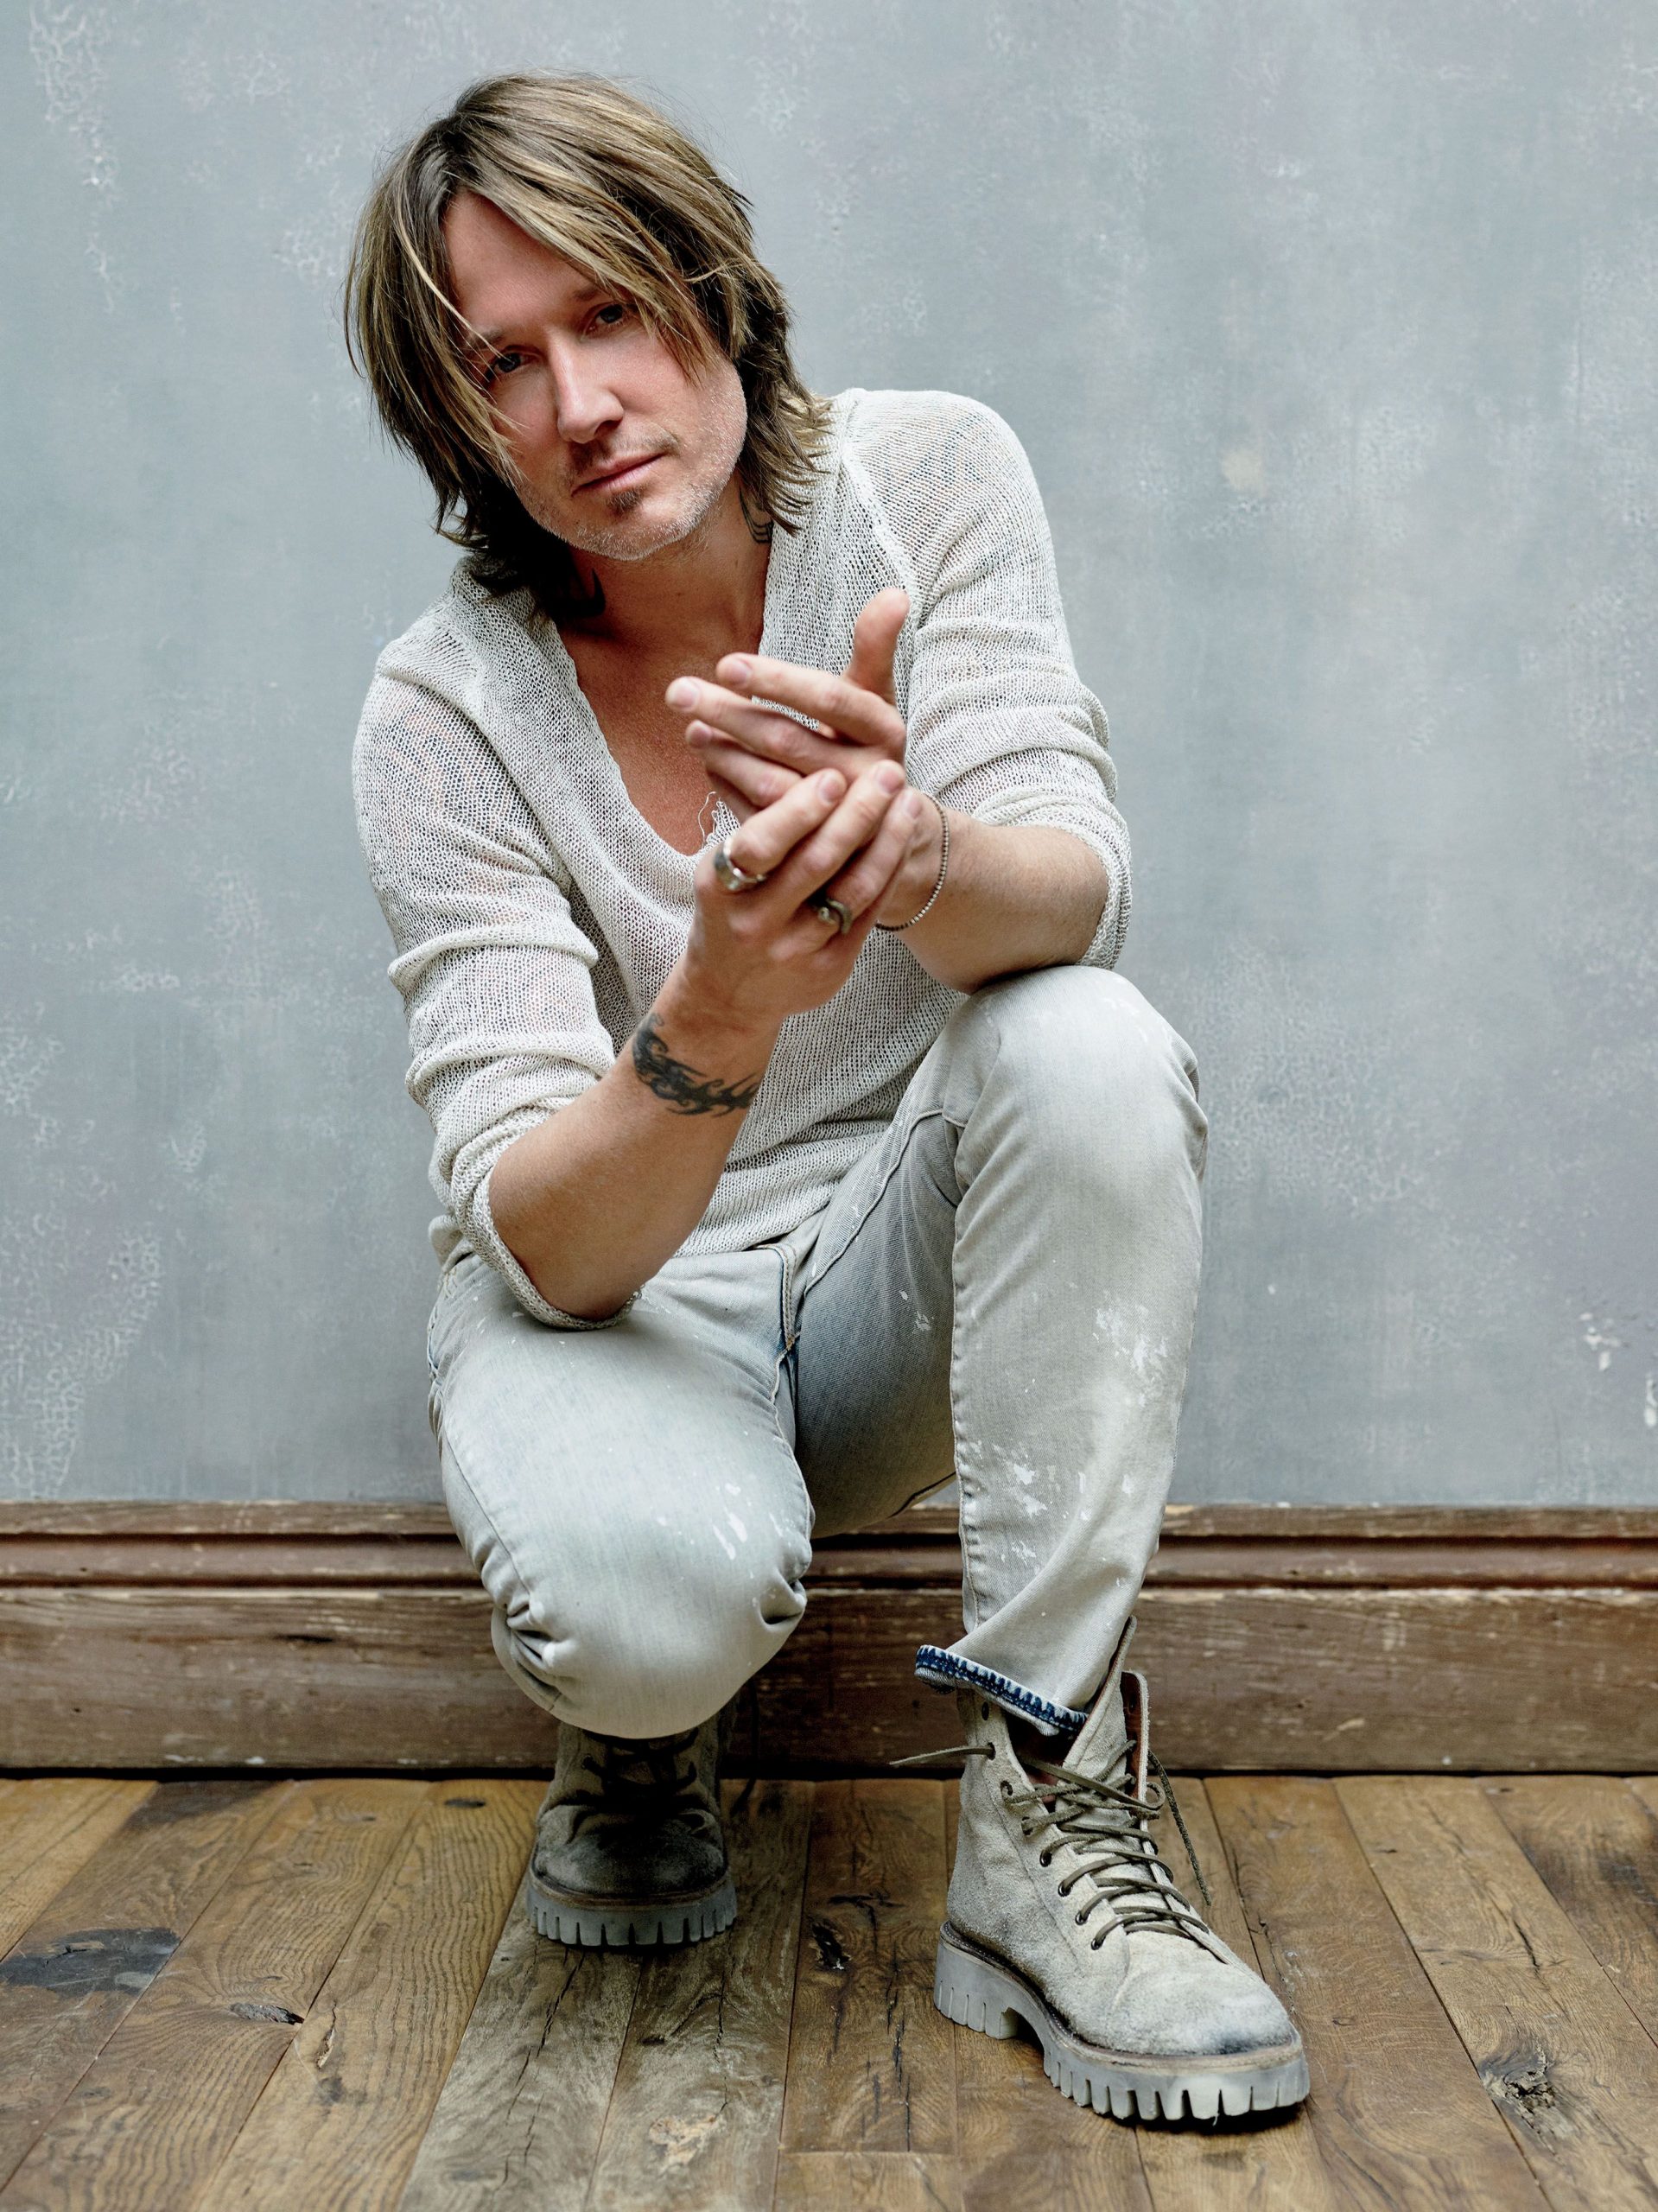 Keith Urban Releases “Wild Hearts” Music Video